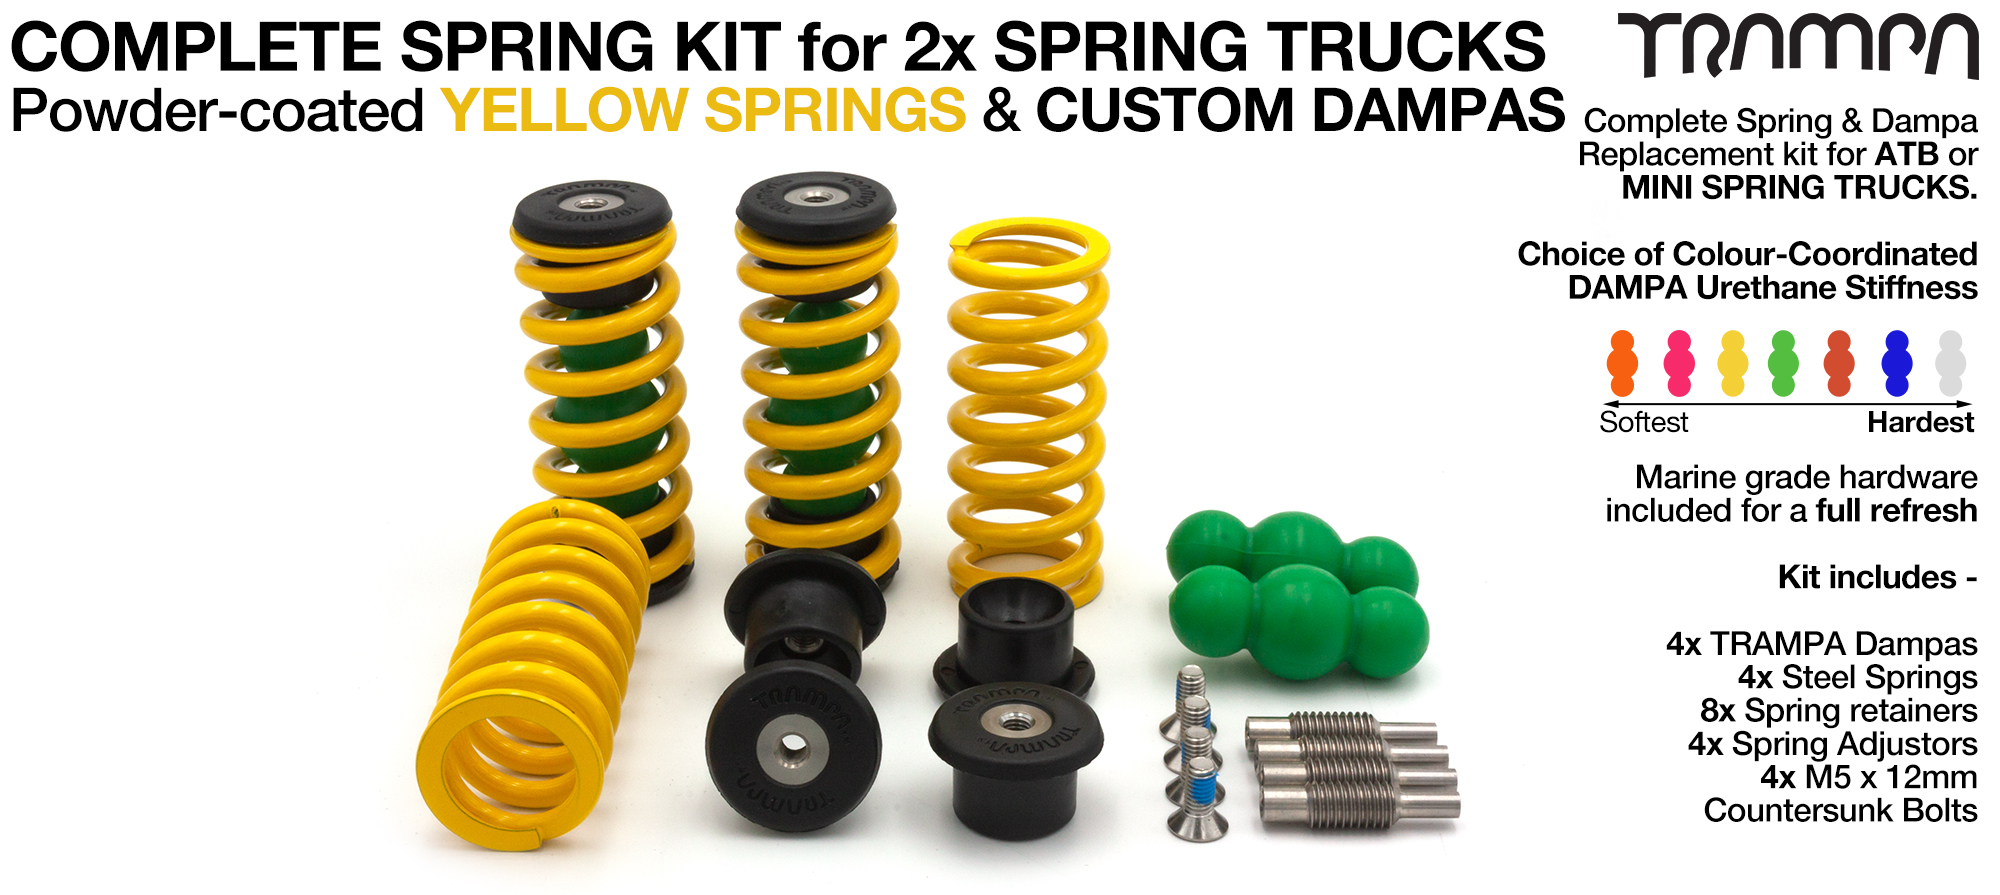 Complete Spring kit for 1x Board = 4x YELLOW Springs 4x Dampa 8x Spring Retainers 4x Spring Adjuster & 4 M5x12mm Countersunk Bolt 